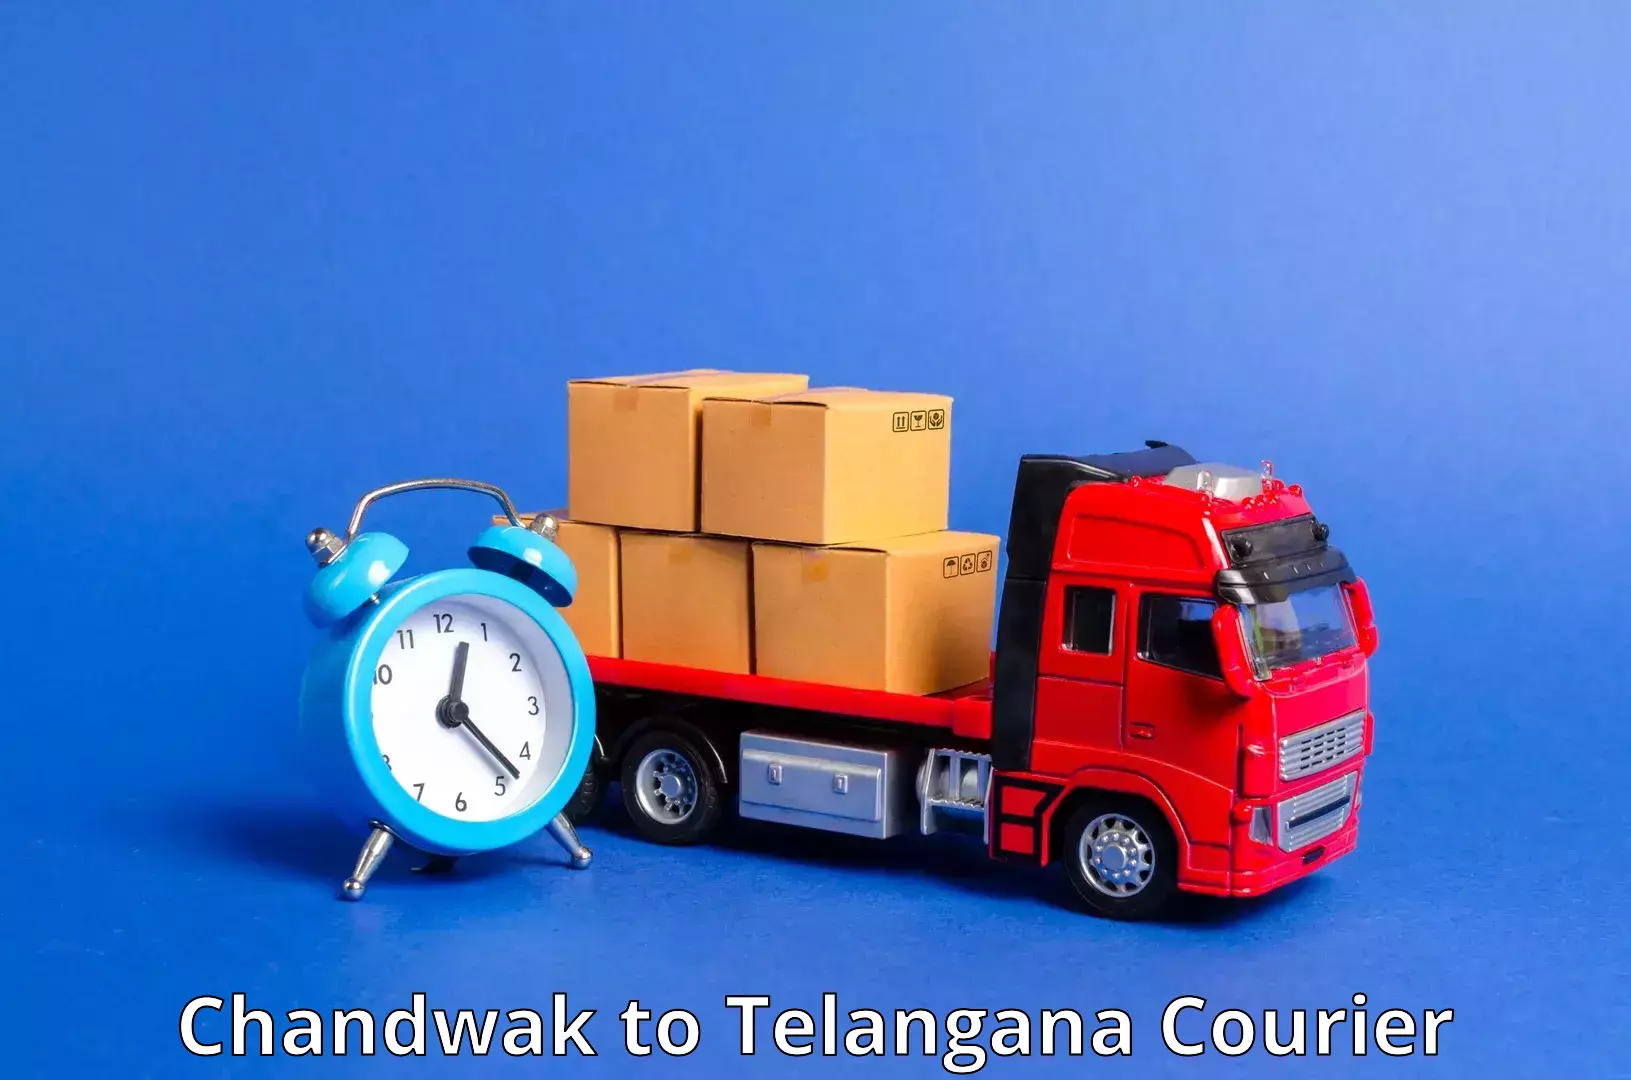 Advanced shipping services Chandwak to Ghanpur